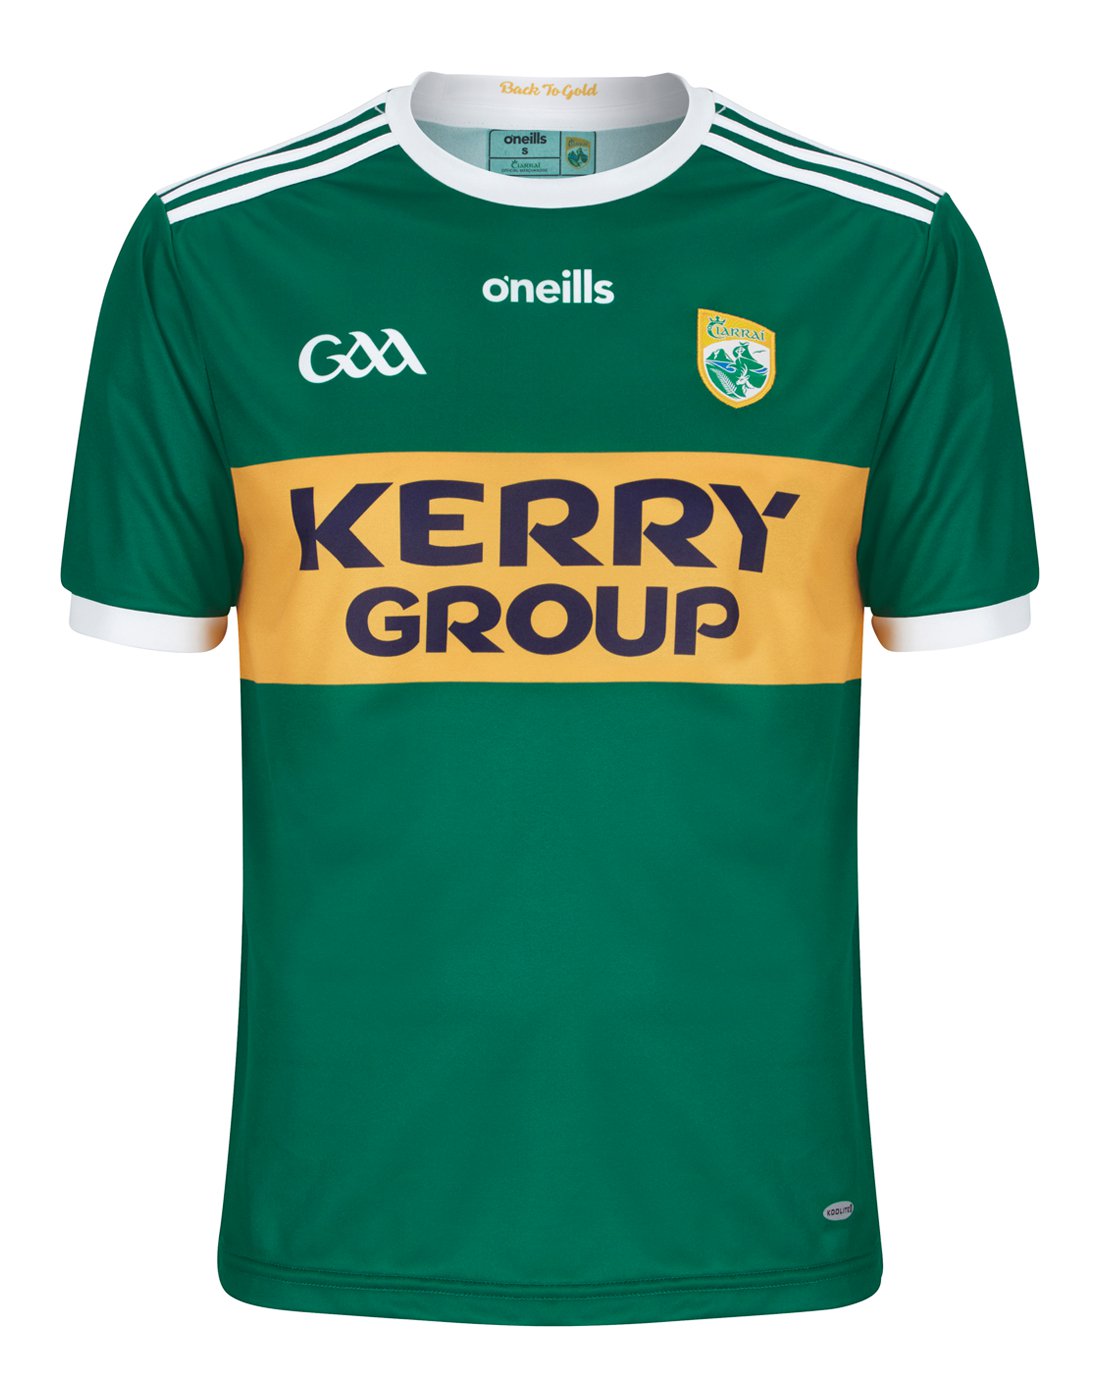 kerry adidas jersey for sale